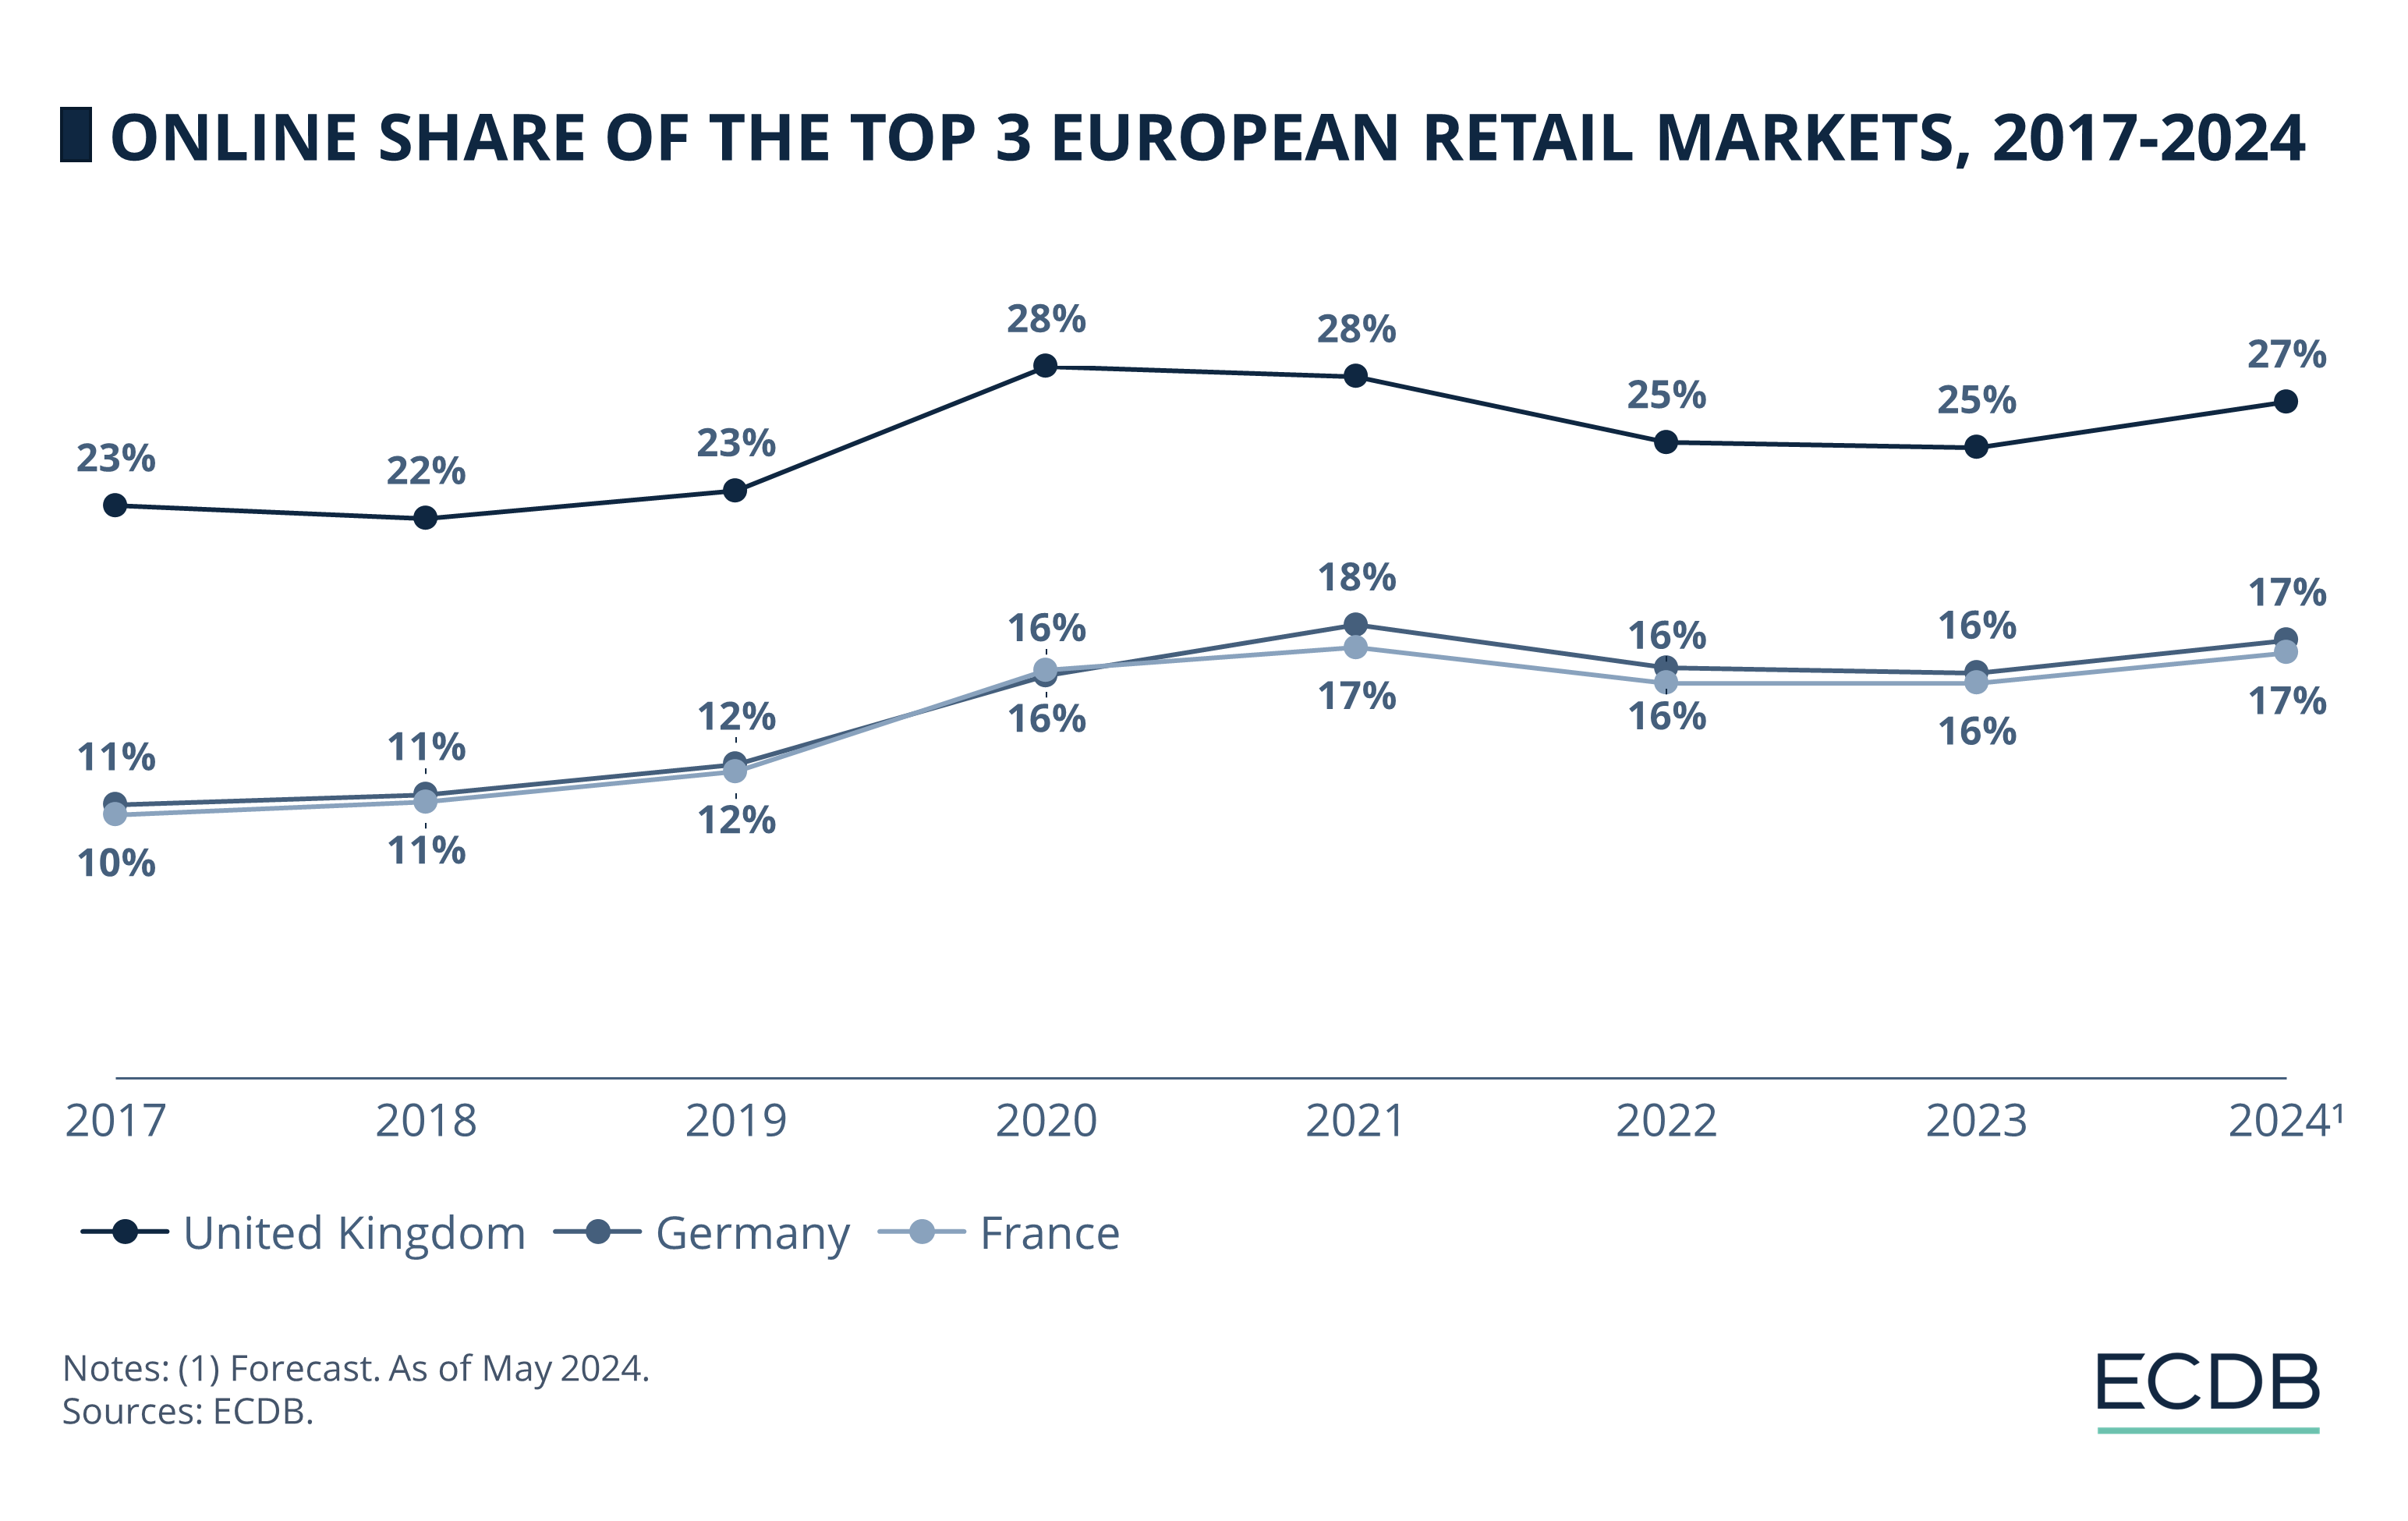 Online Share of the Top 3 European Retail Markets, 2017-2024